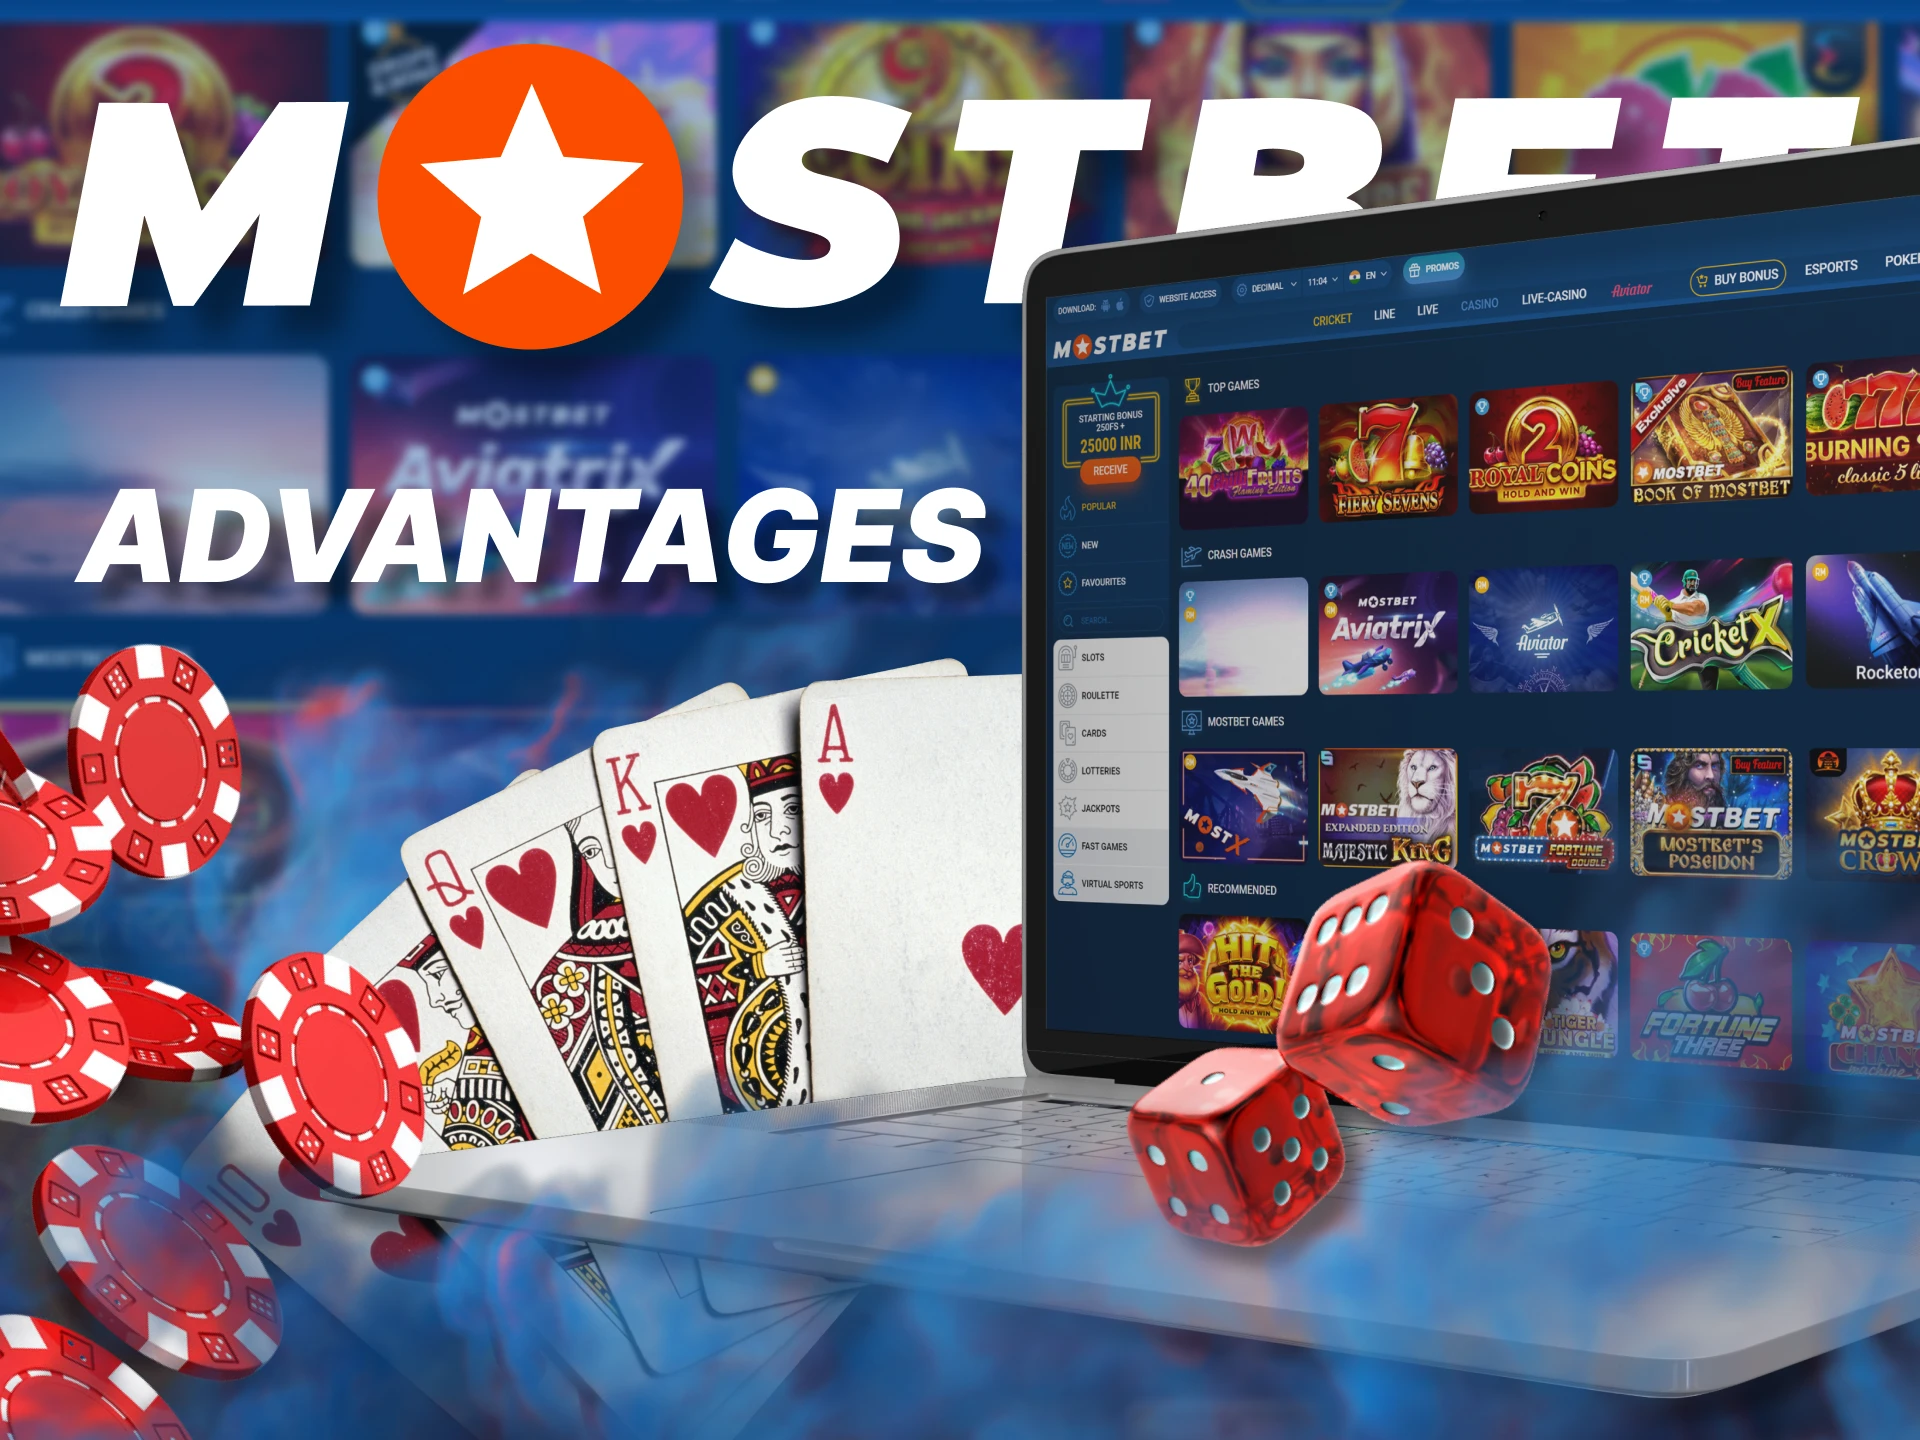 Mostbet Casino has many advantages for its players.